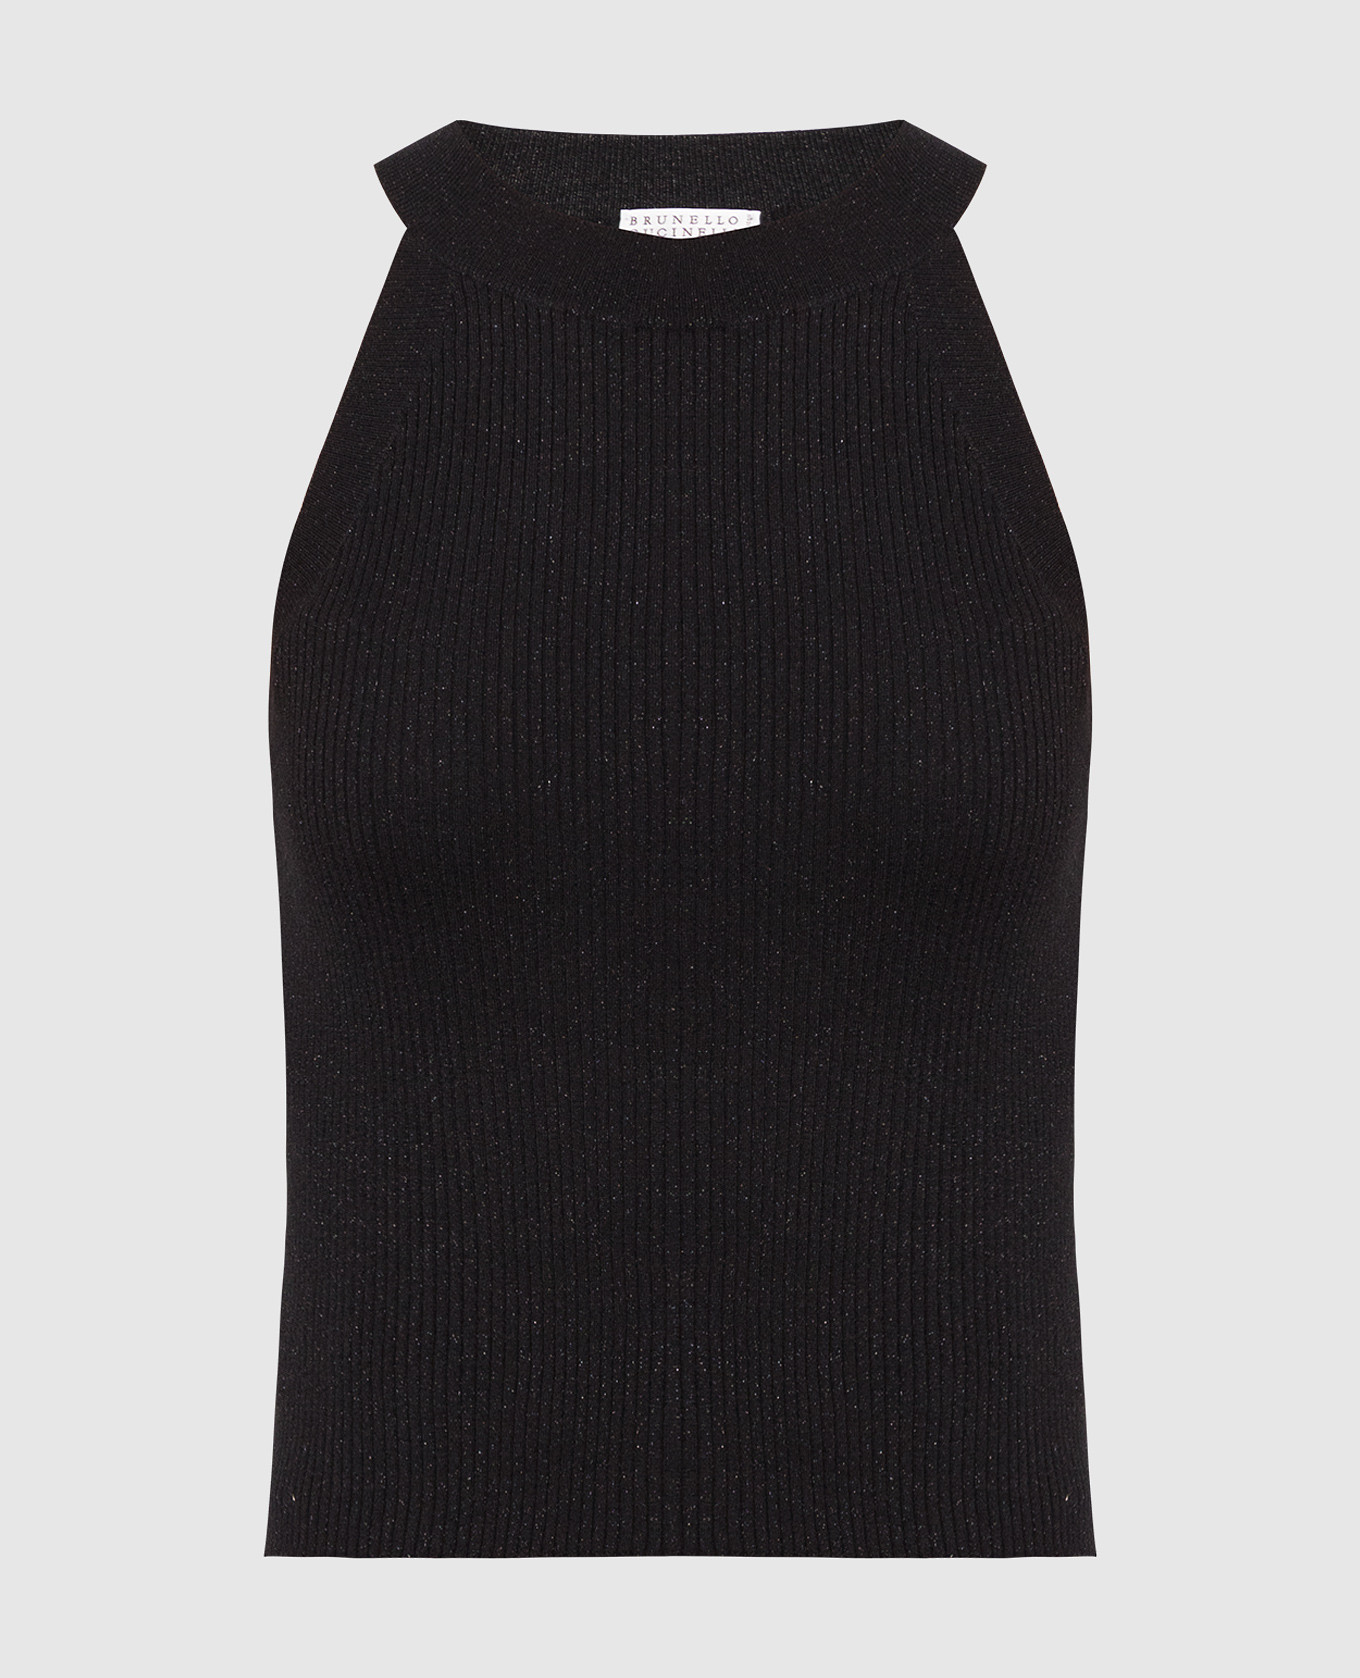 Black ribbed top with lurex